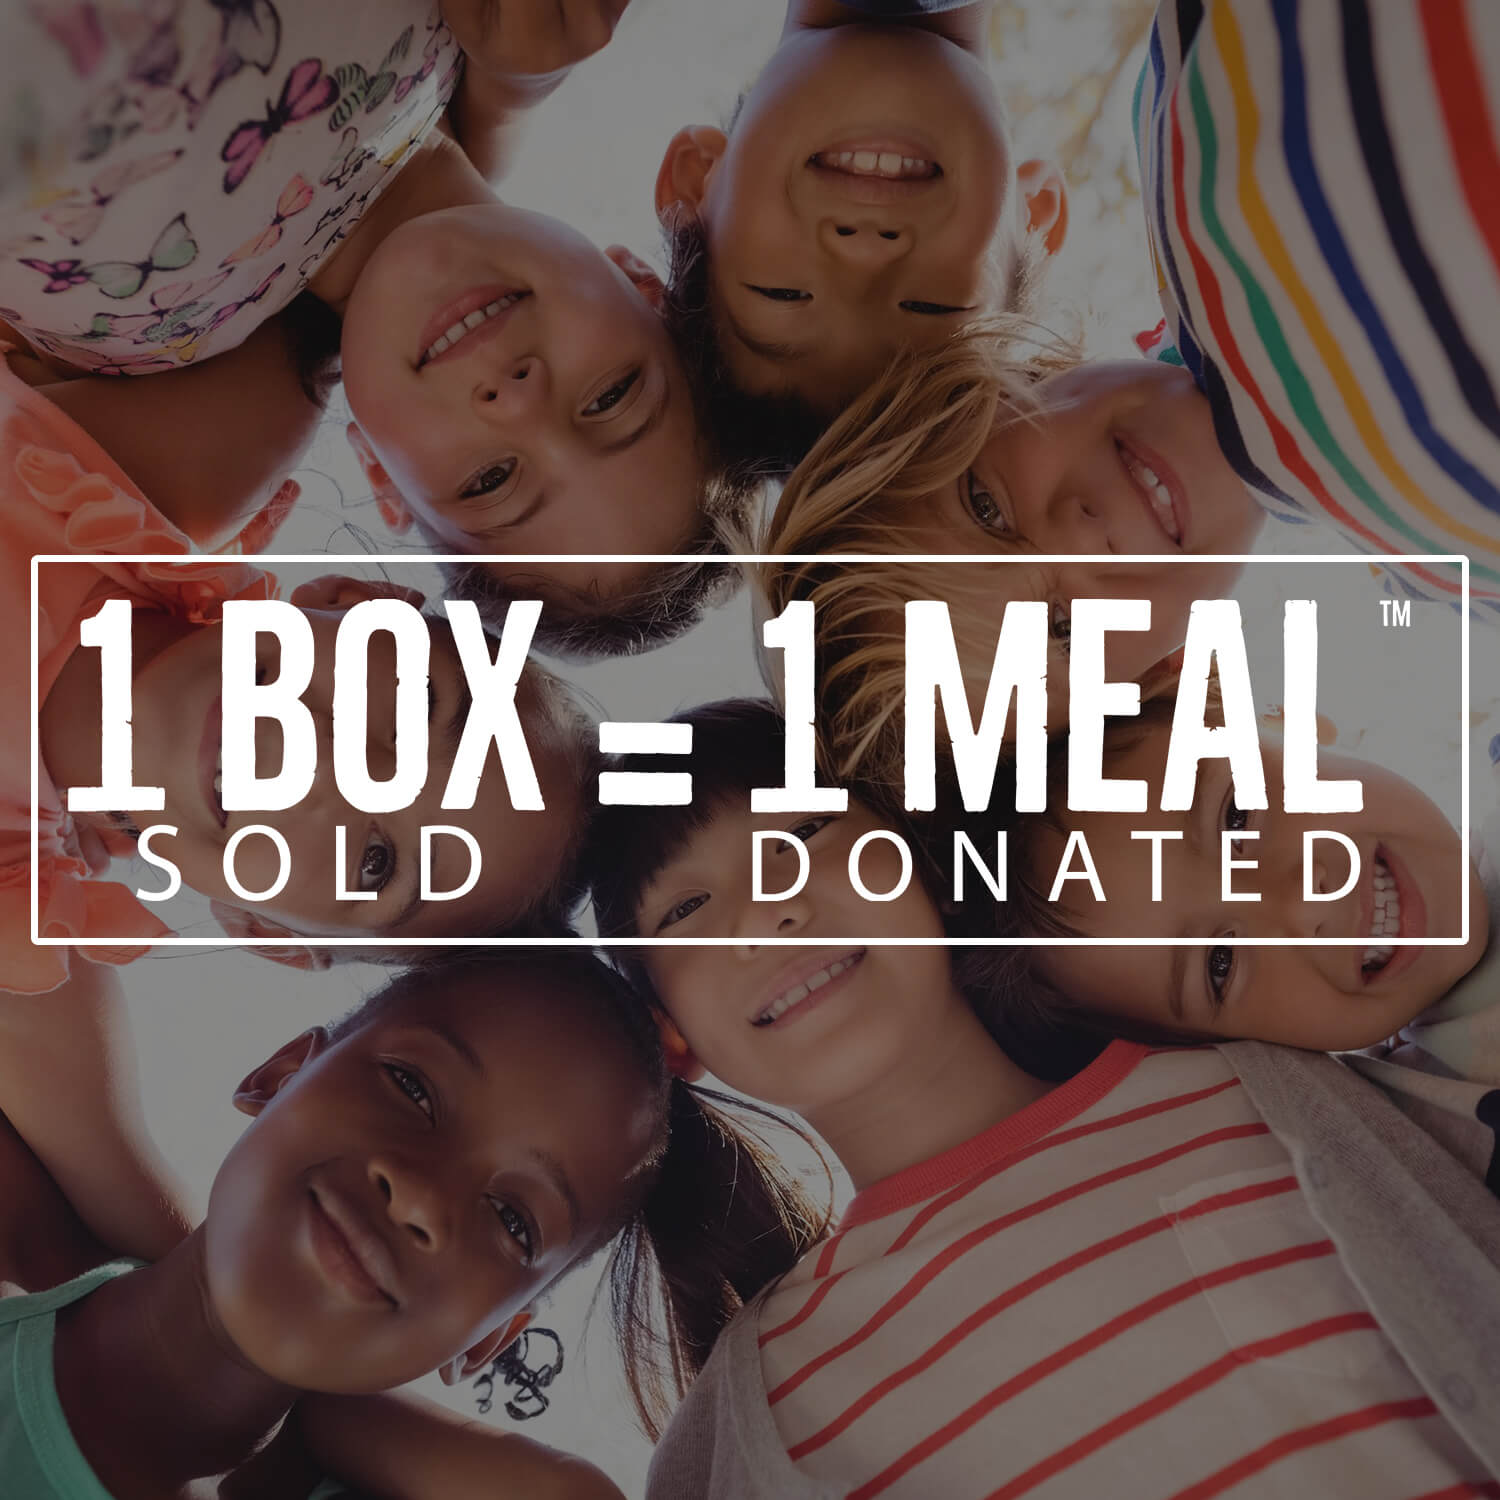 1 Box sold = 1 Meal donated, kids in circle smiling